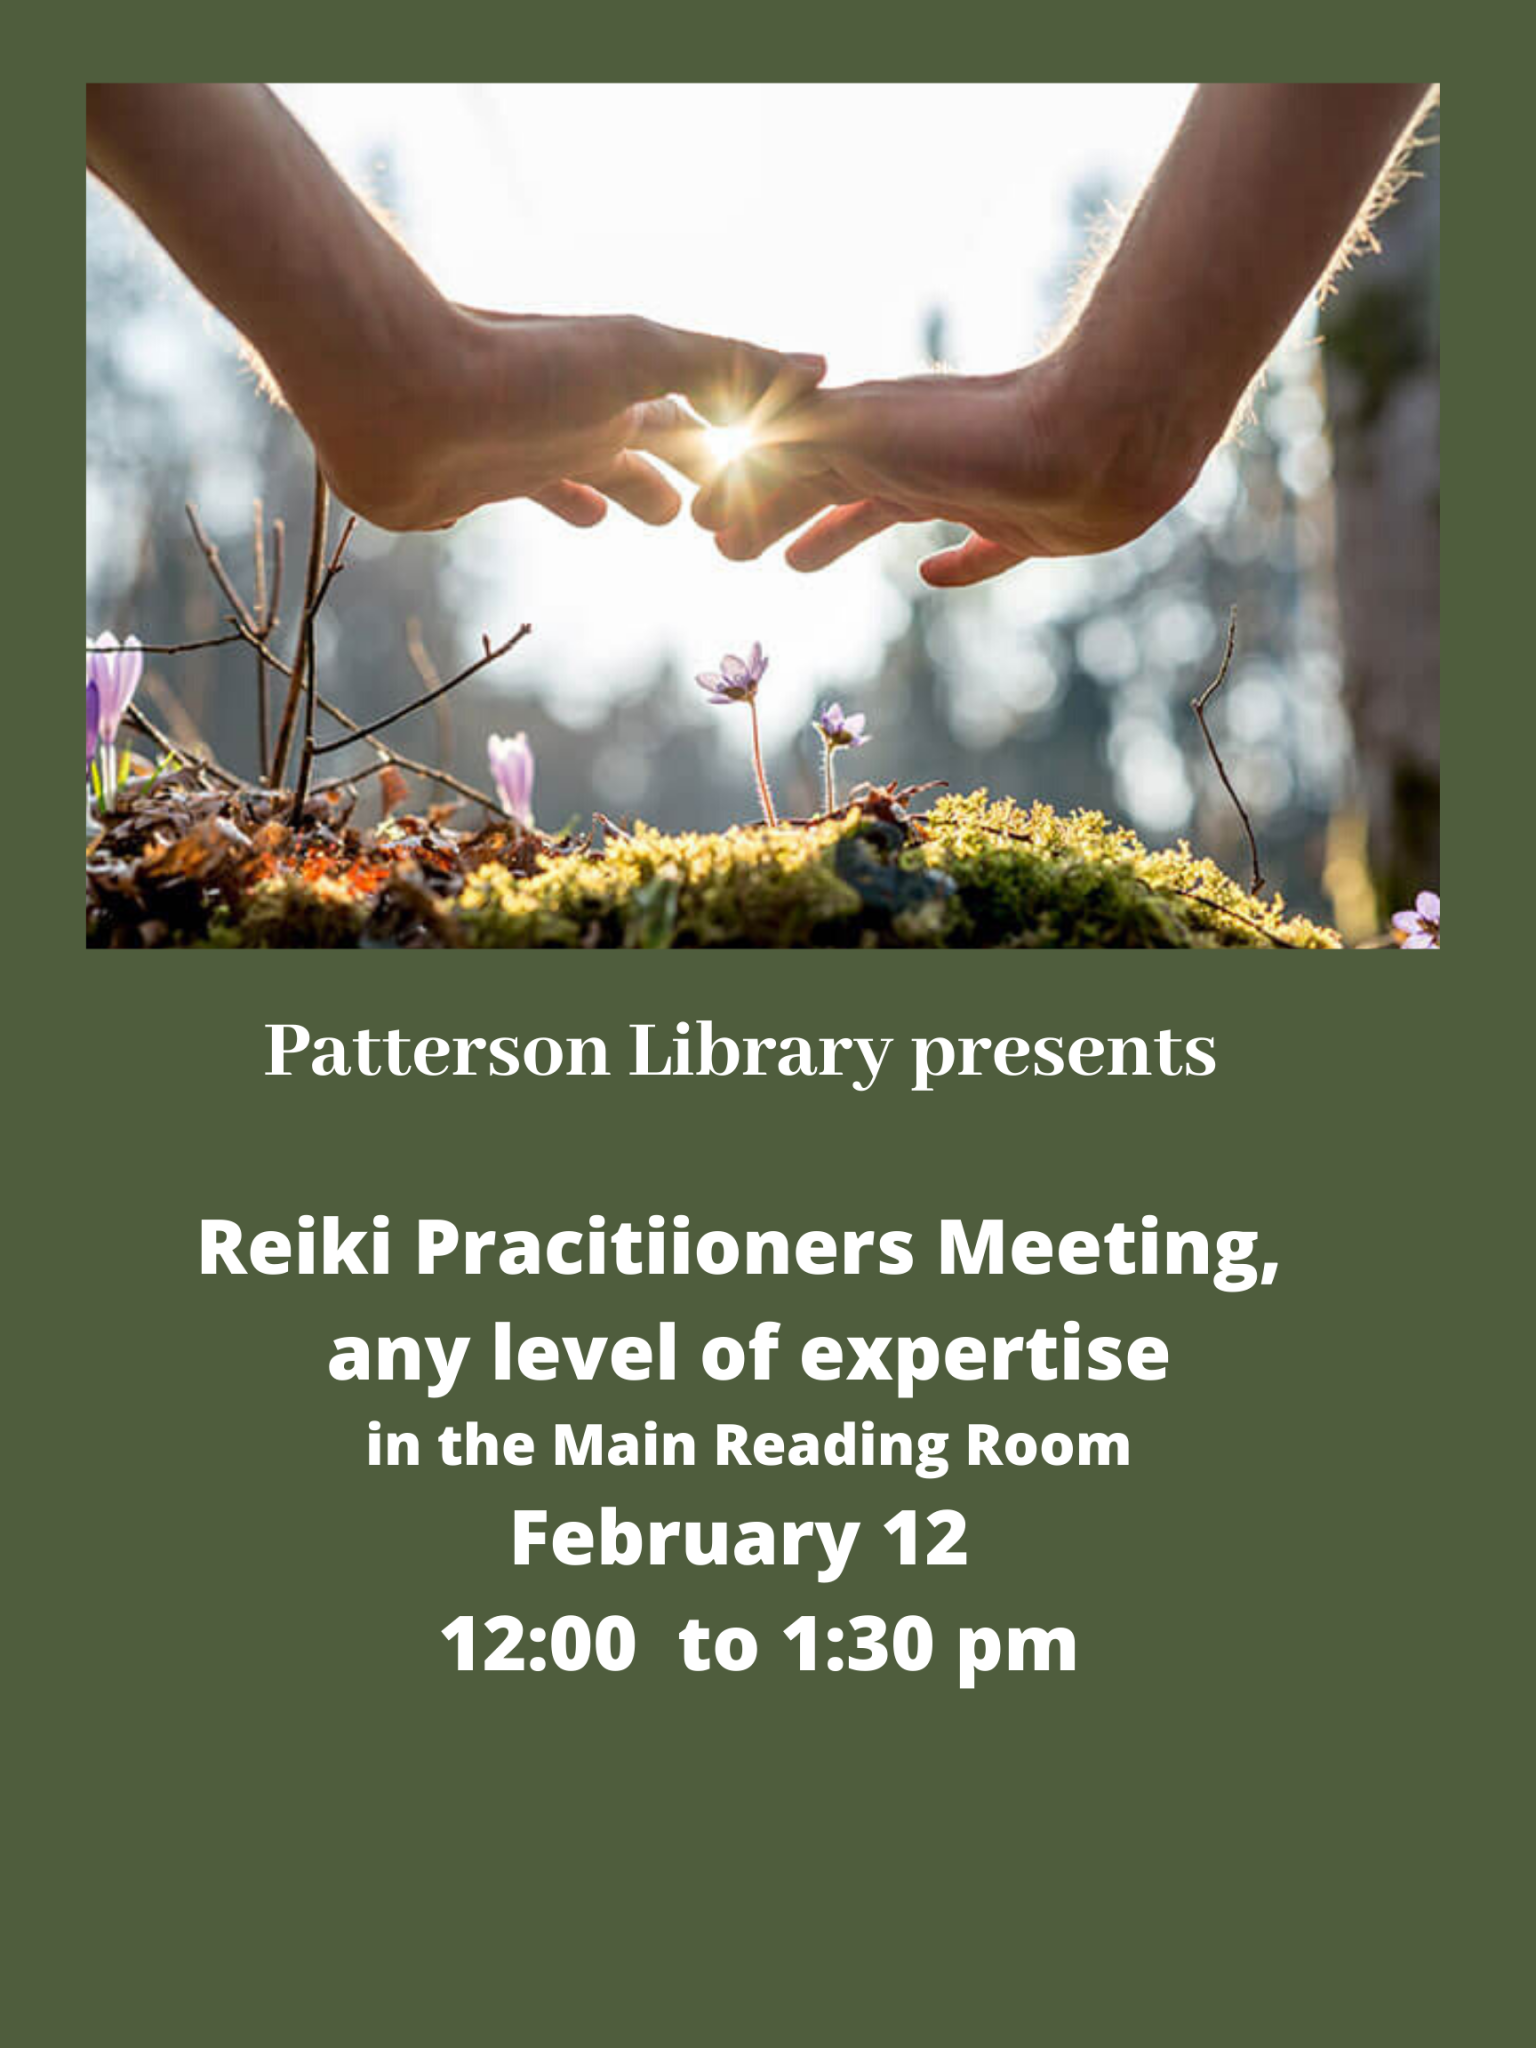 reiki practitioners commerce township, mi